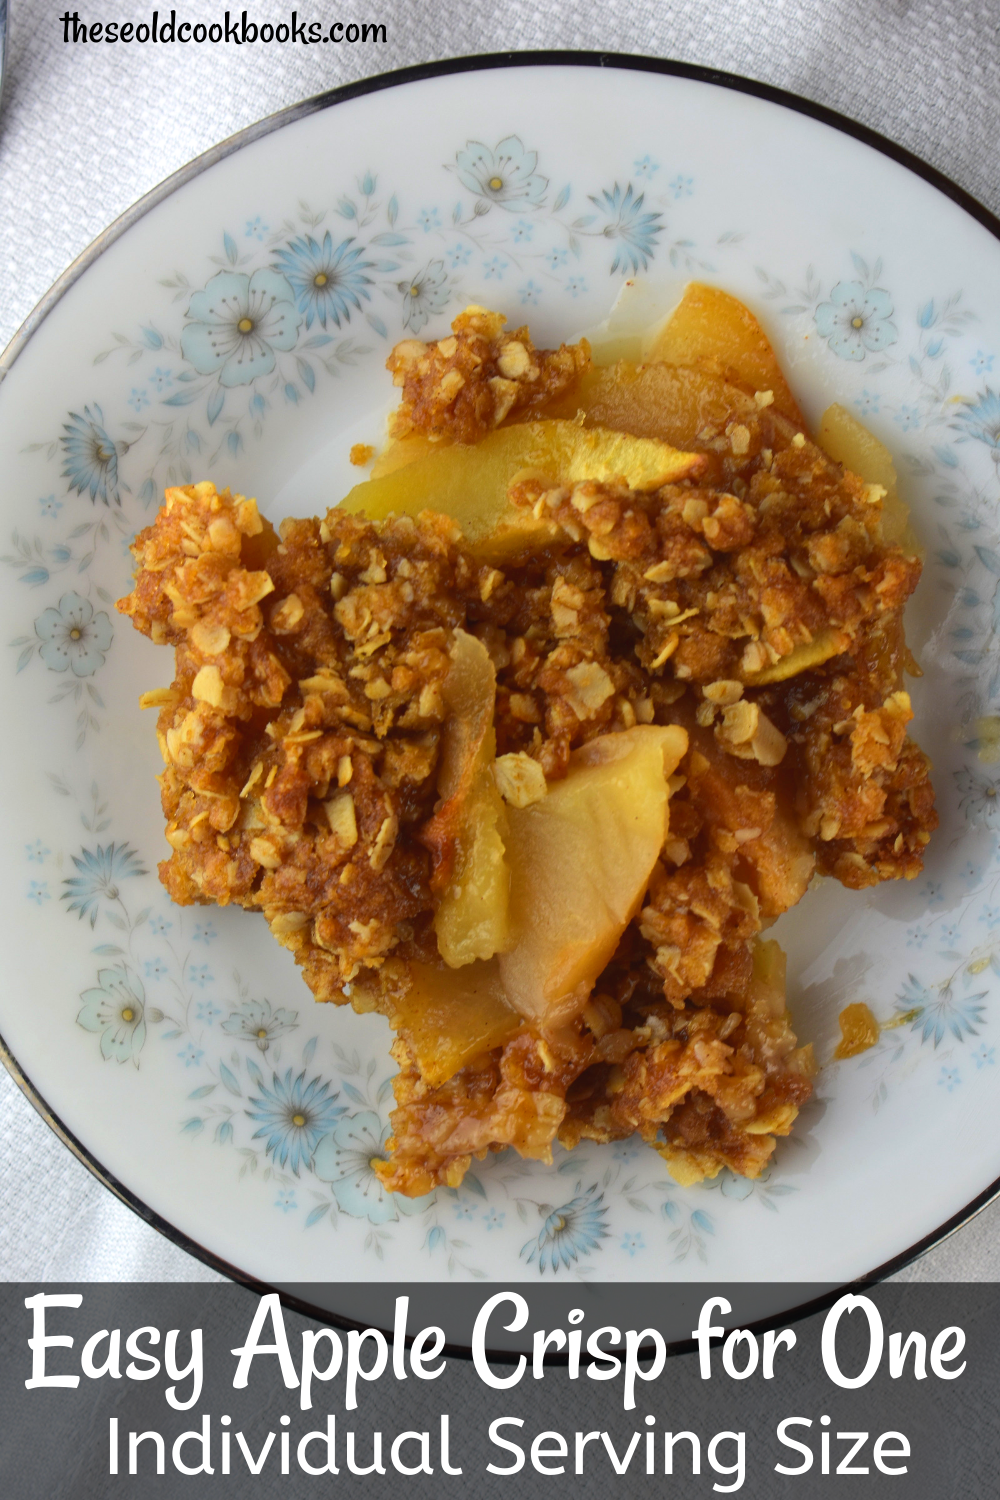 We've taken our Grandma's Famous Apple Crisp and portioned it perfectly for one.  This Easy Apple Crisp for One takes the guilt and temptation out of eating more than you should.